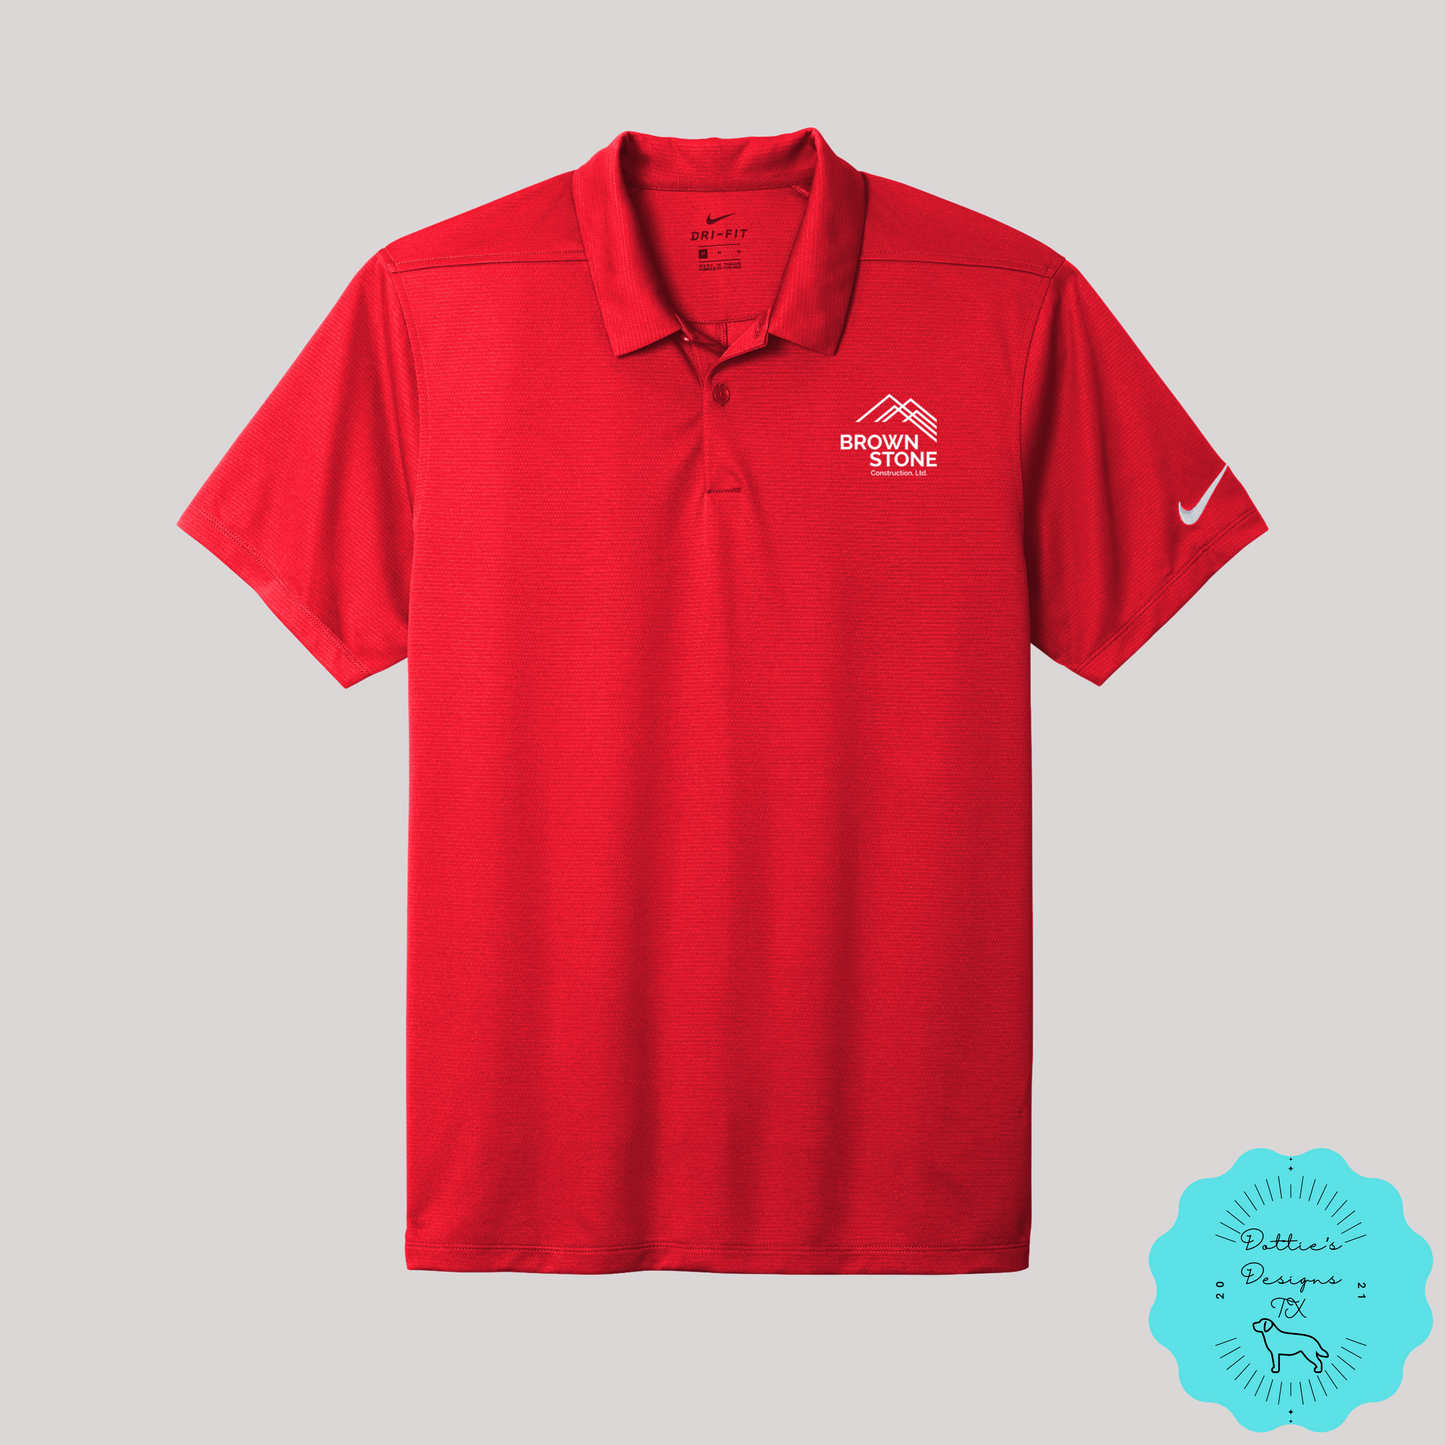 Brownstone Construction, LTD. Embroidered Nike Dry Essential Solid Polo